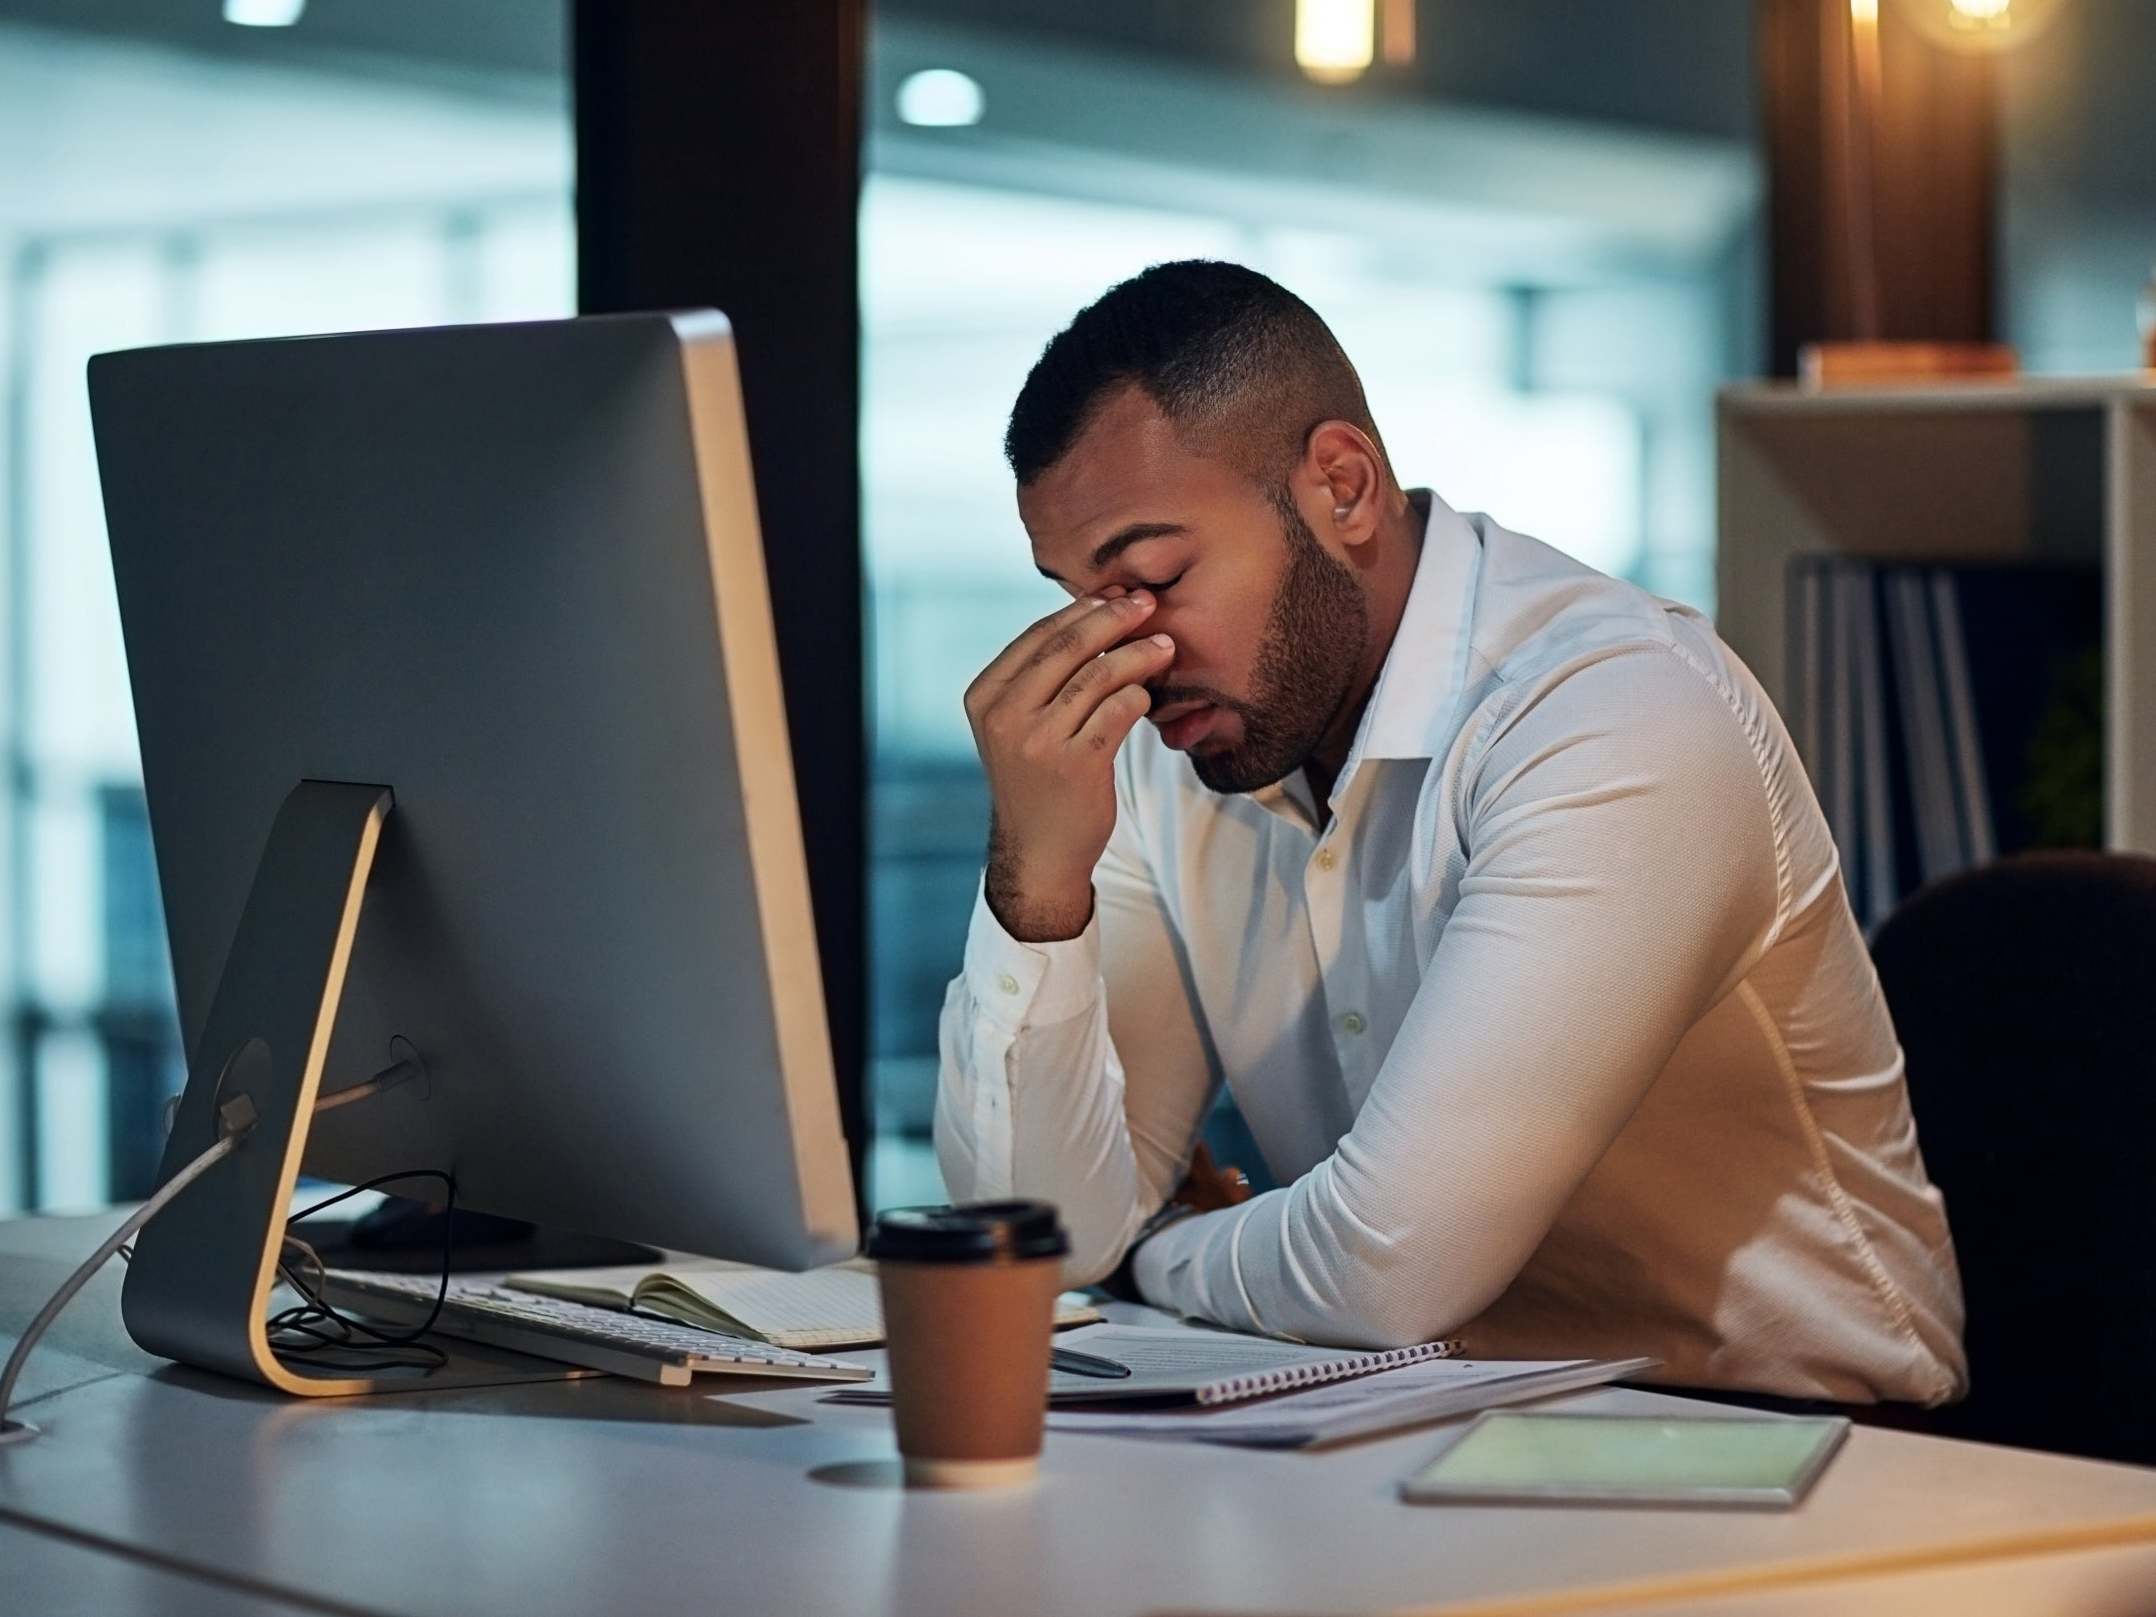 Headaches and migraines cost the UK economy £4.4bn a year through lost work days